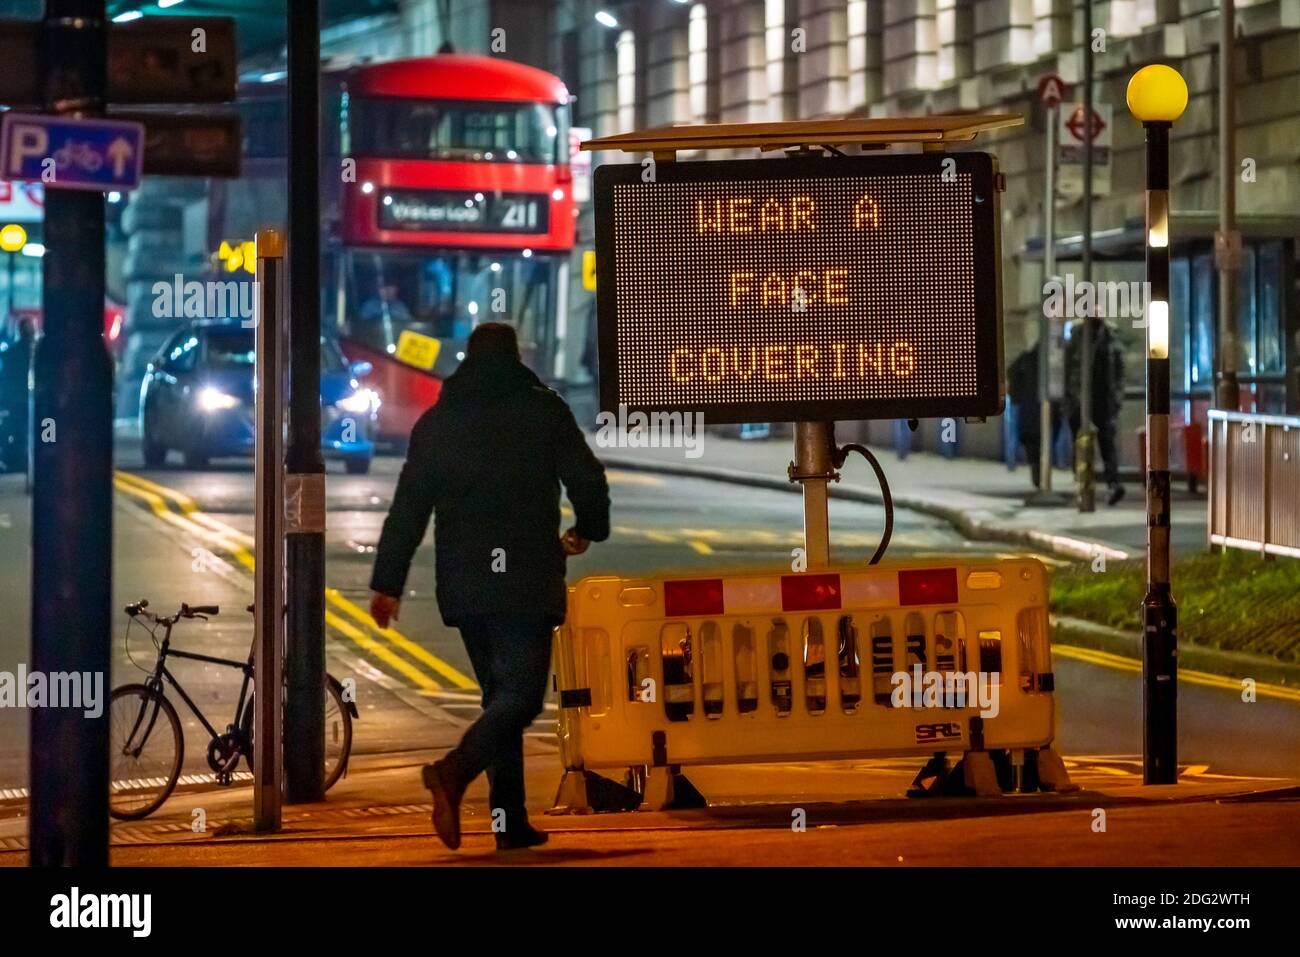 London, UK. 7th Dec 2020. Coronavirus: Rush Hour outside Waterloo Station. Face coverings remain in place for all users of city public transport. Credit: Guy Corbishley/Alamy Live News Stock Photo